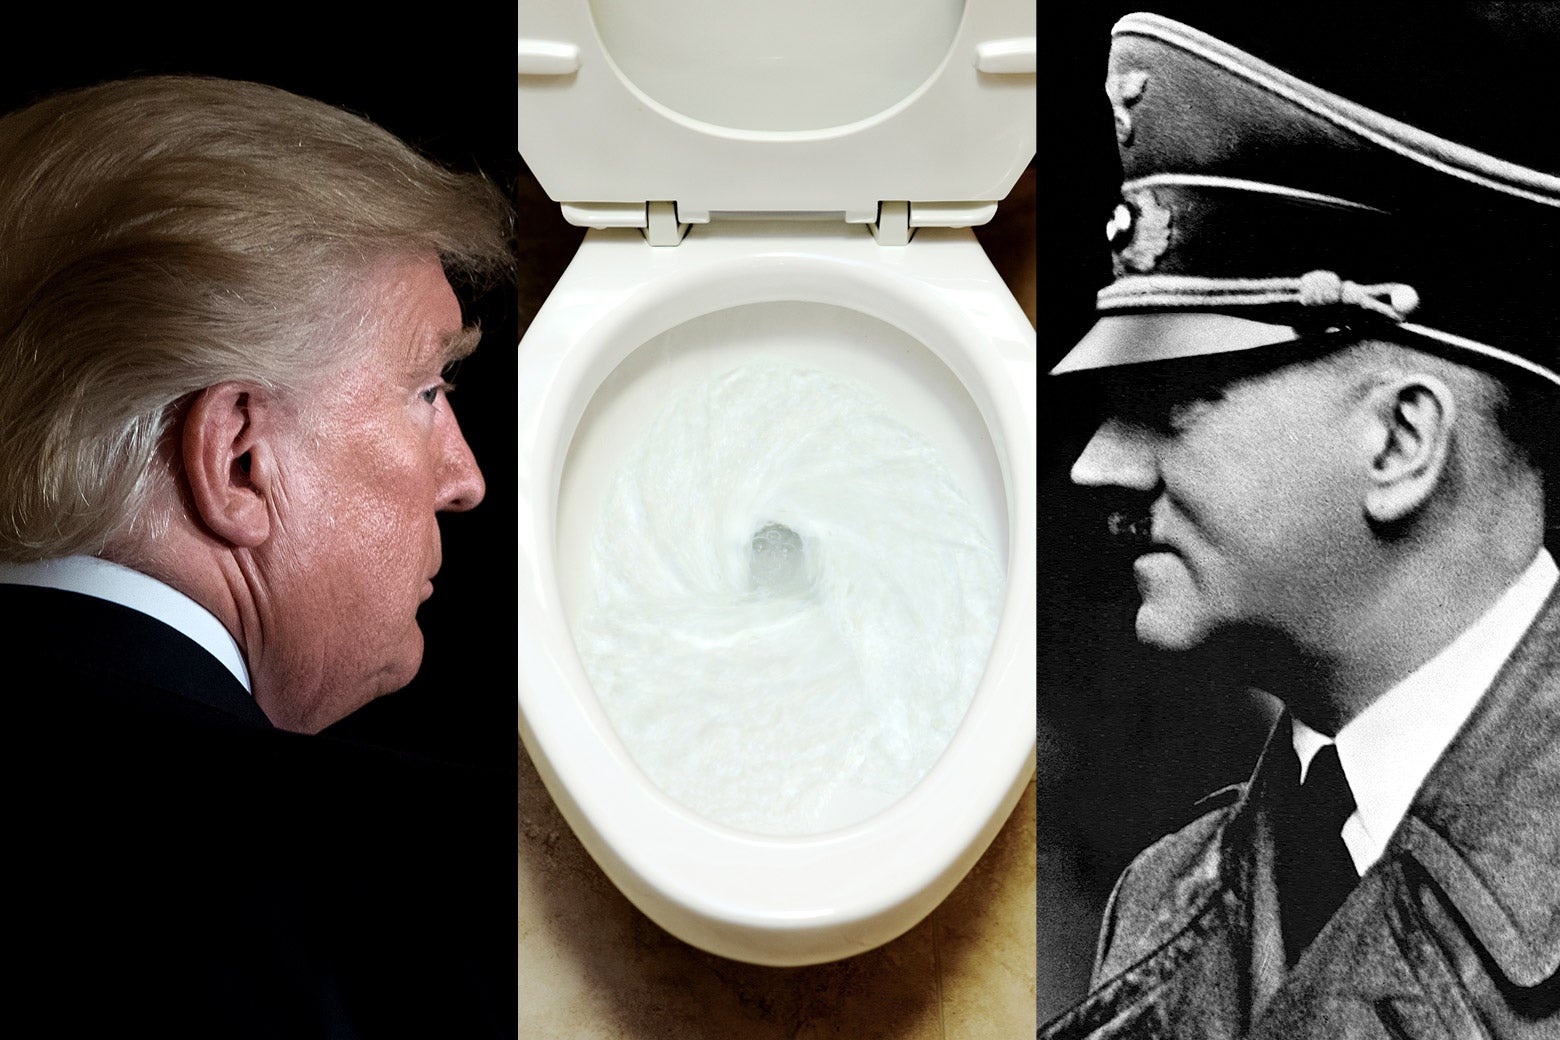 Trump flushed documents down a toilet, in photos, and asked why U.S. generals couldn't be loyal to him like Hitler's—two stories on the same day!Notable topicsActivating this button will toggle the display of additional contentSlate homepageSubmit searchEnter queryActivating this button will toggle the display of additional contentOpen menuClose menuNotable topicsActivating this button will toggle the display of additional contentSlate on InstagramSlate on TwitterSlate on FacebookSlate homepage*Slate on InstagramSlate on TwitterSlate on FacebookThe Slate Group logo